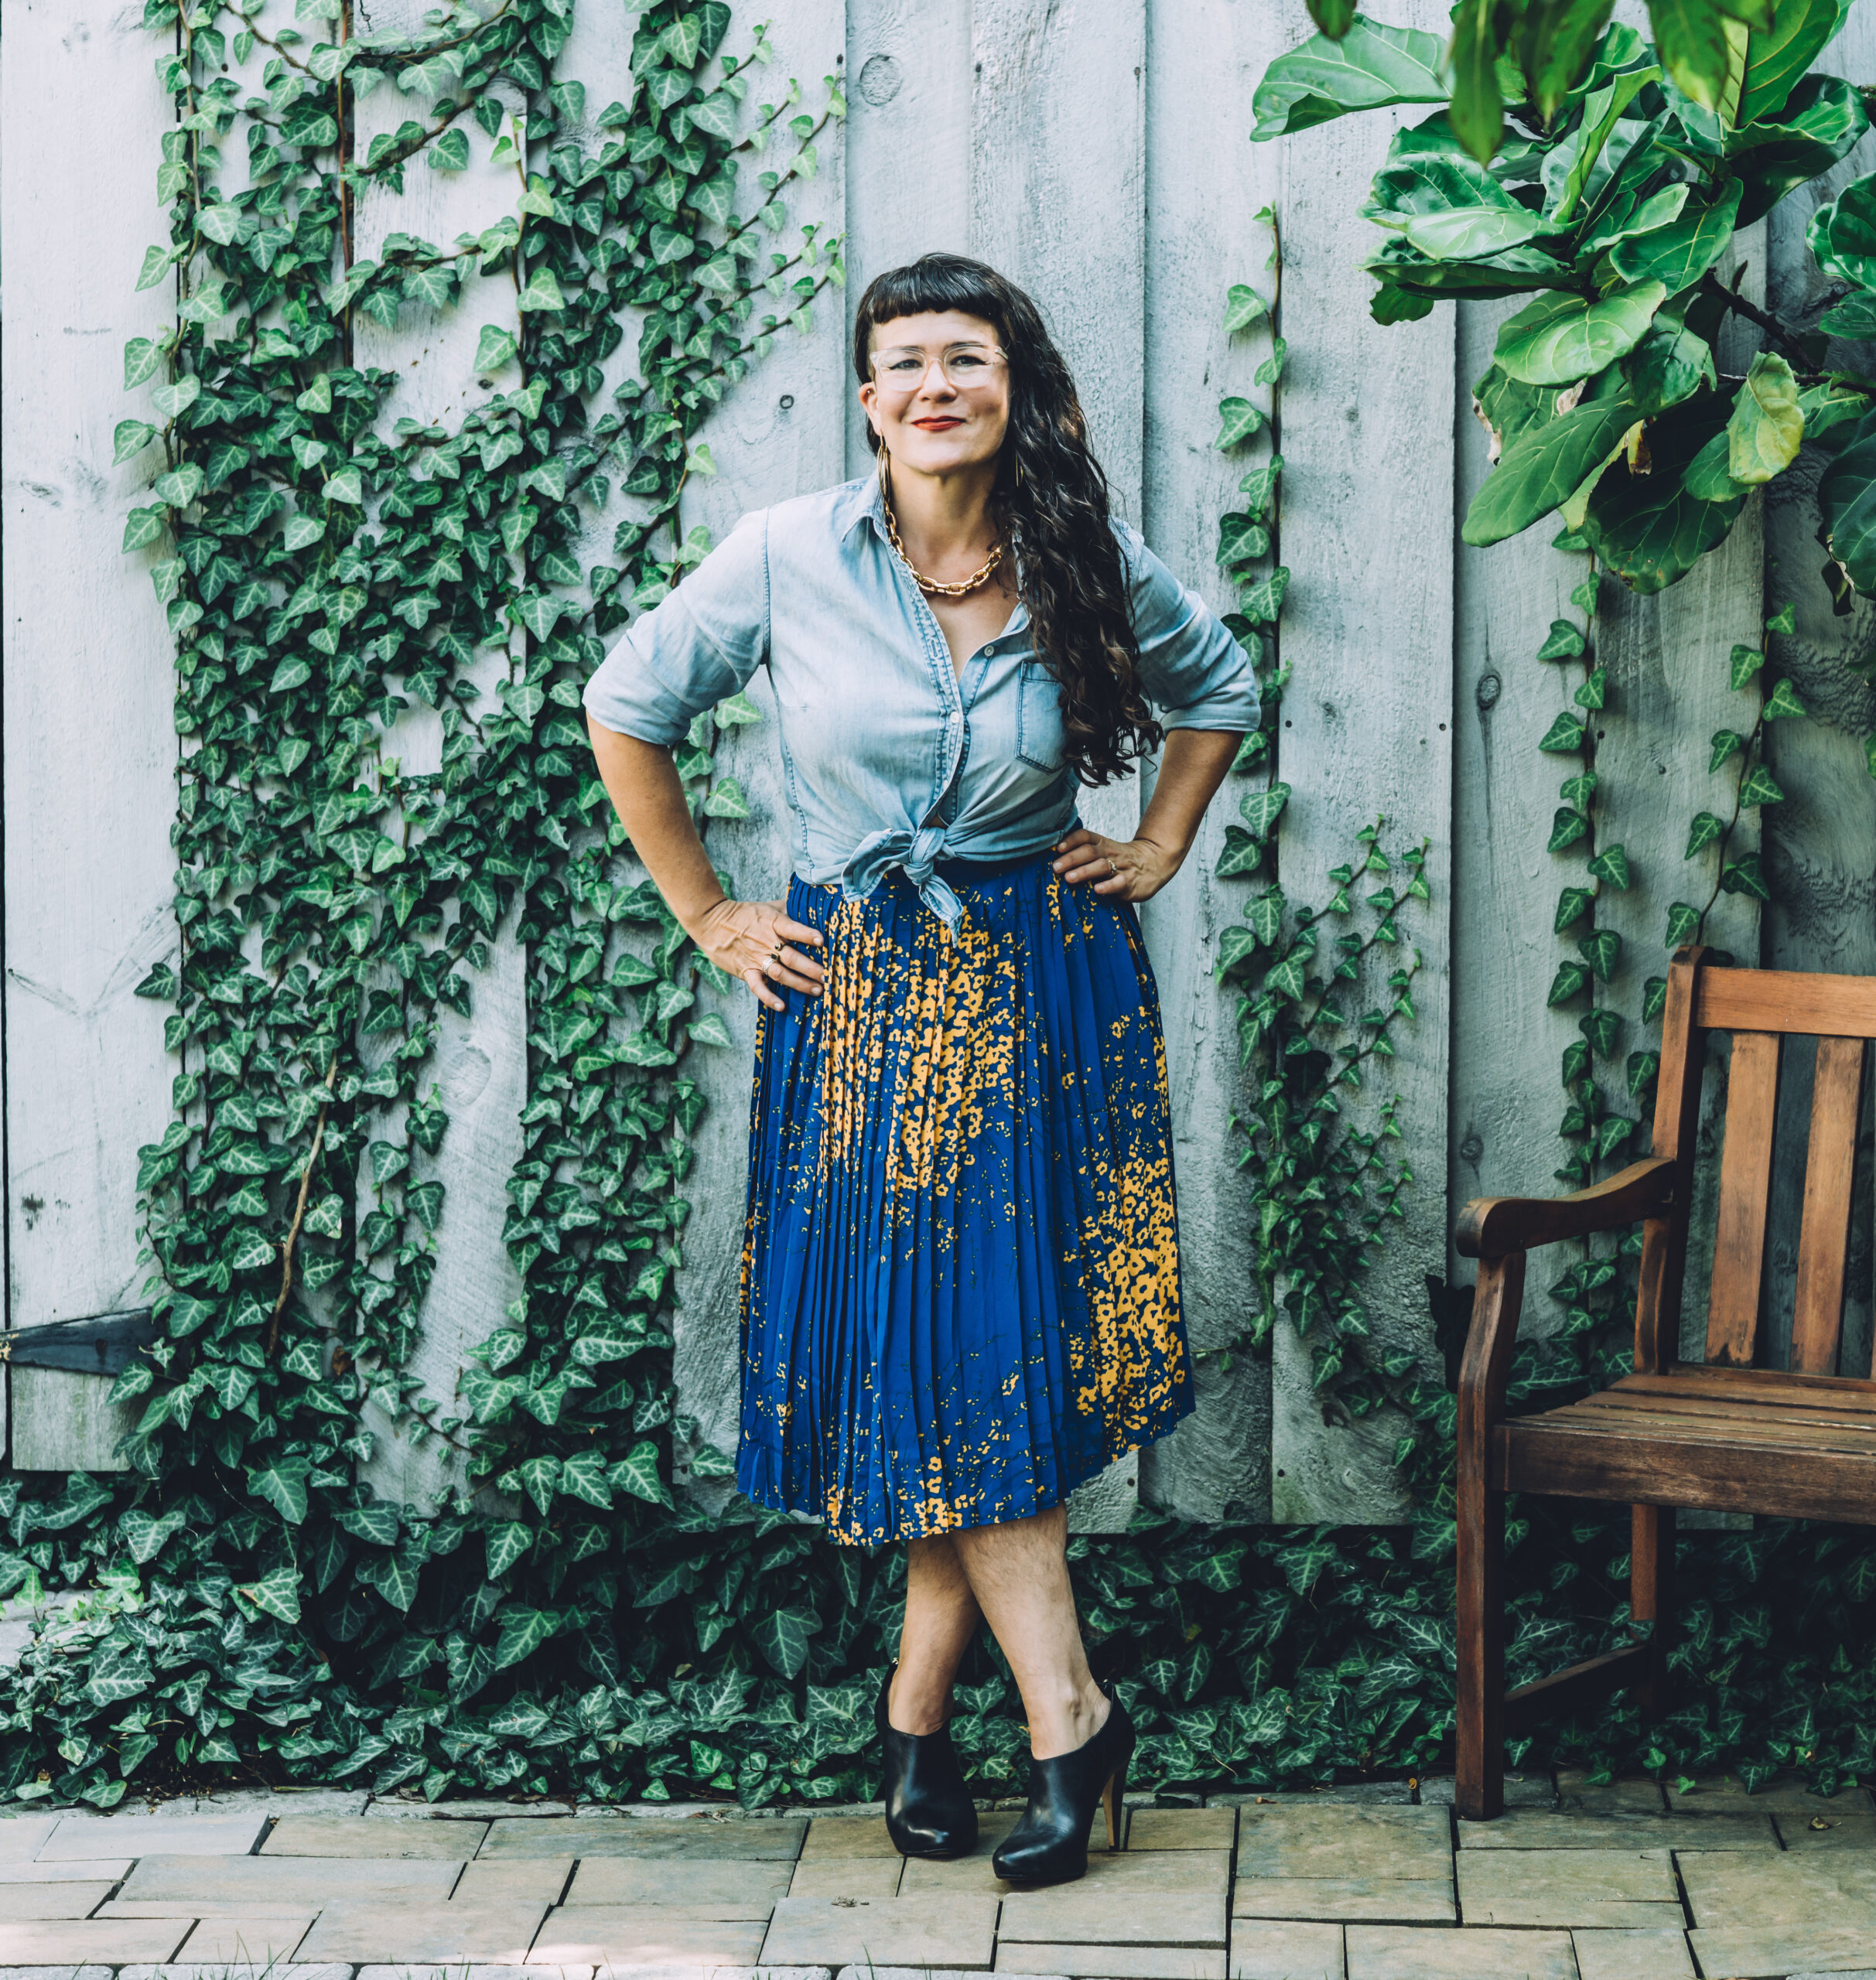 life coach victoria albina standing in front of an ivy-covered wall